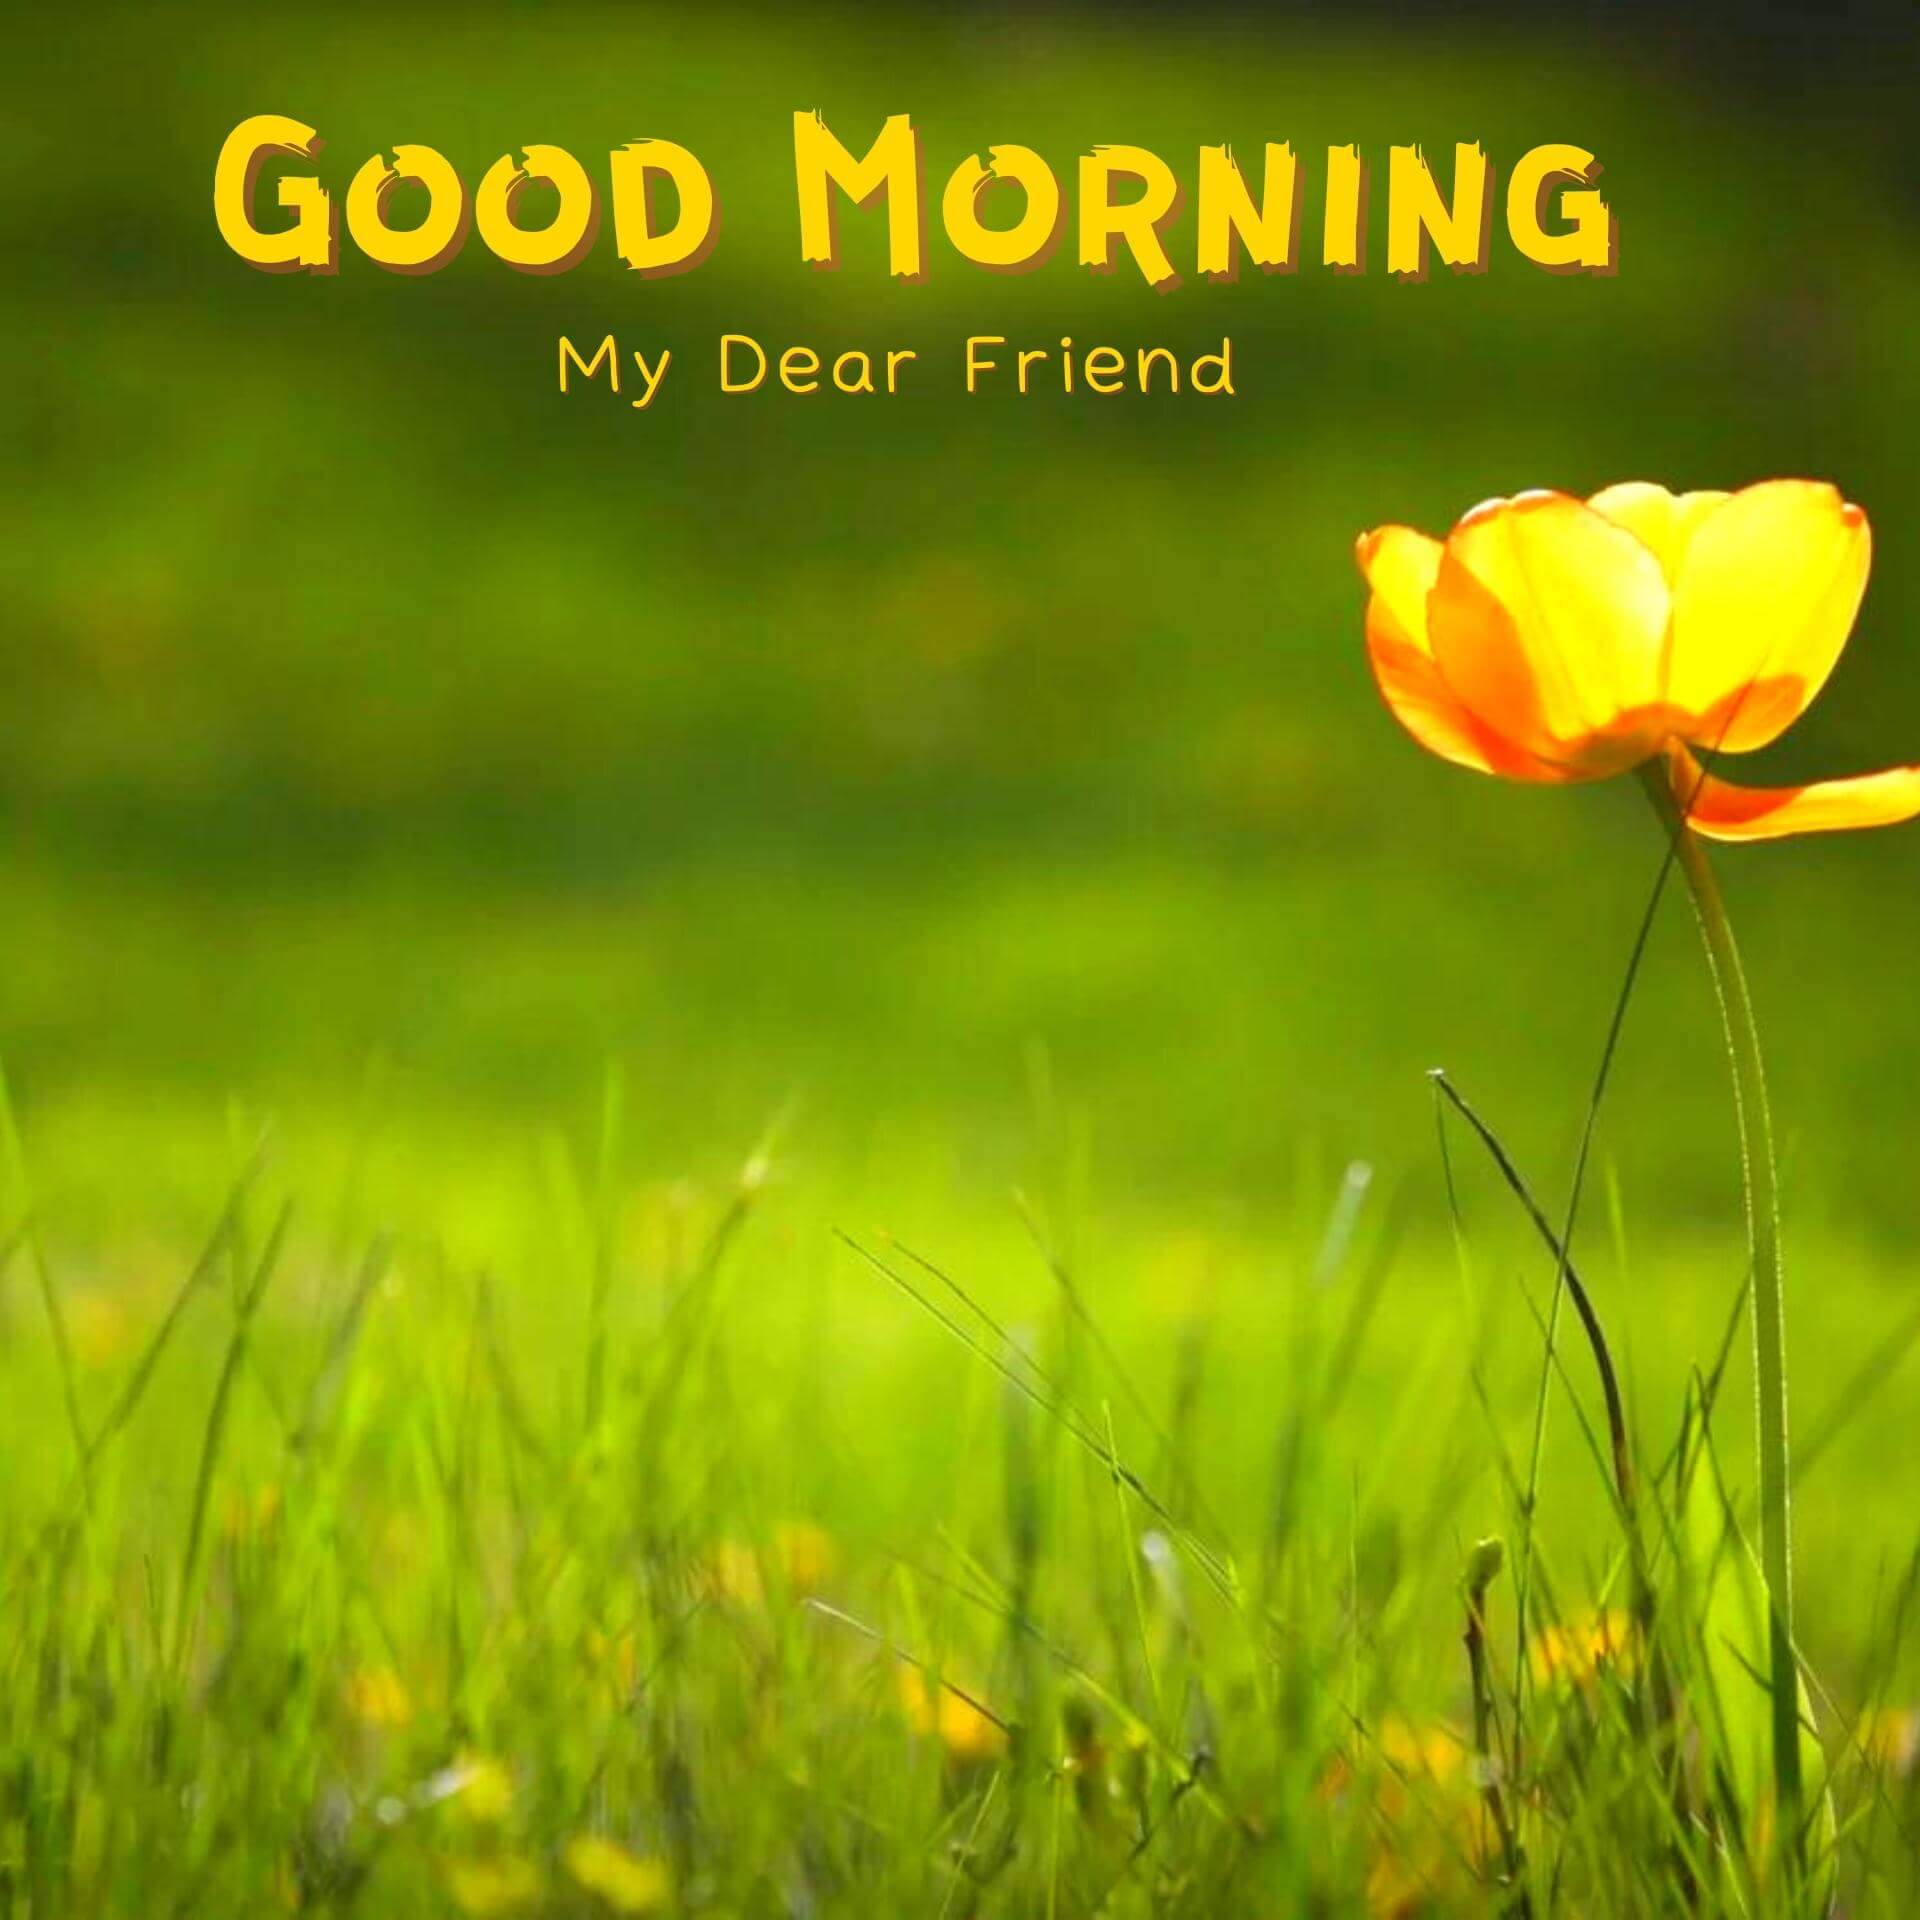 morning wishes picture